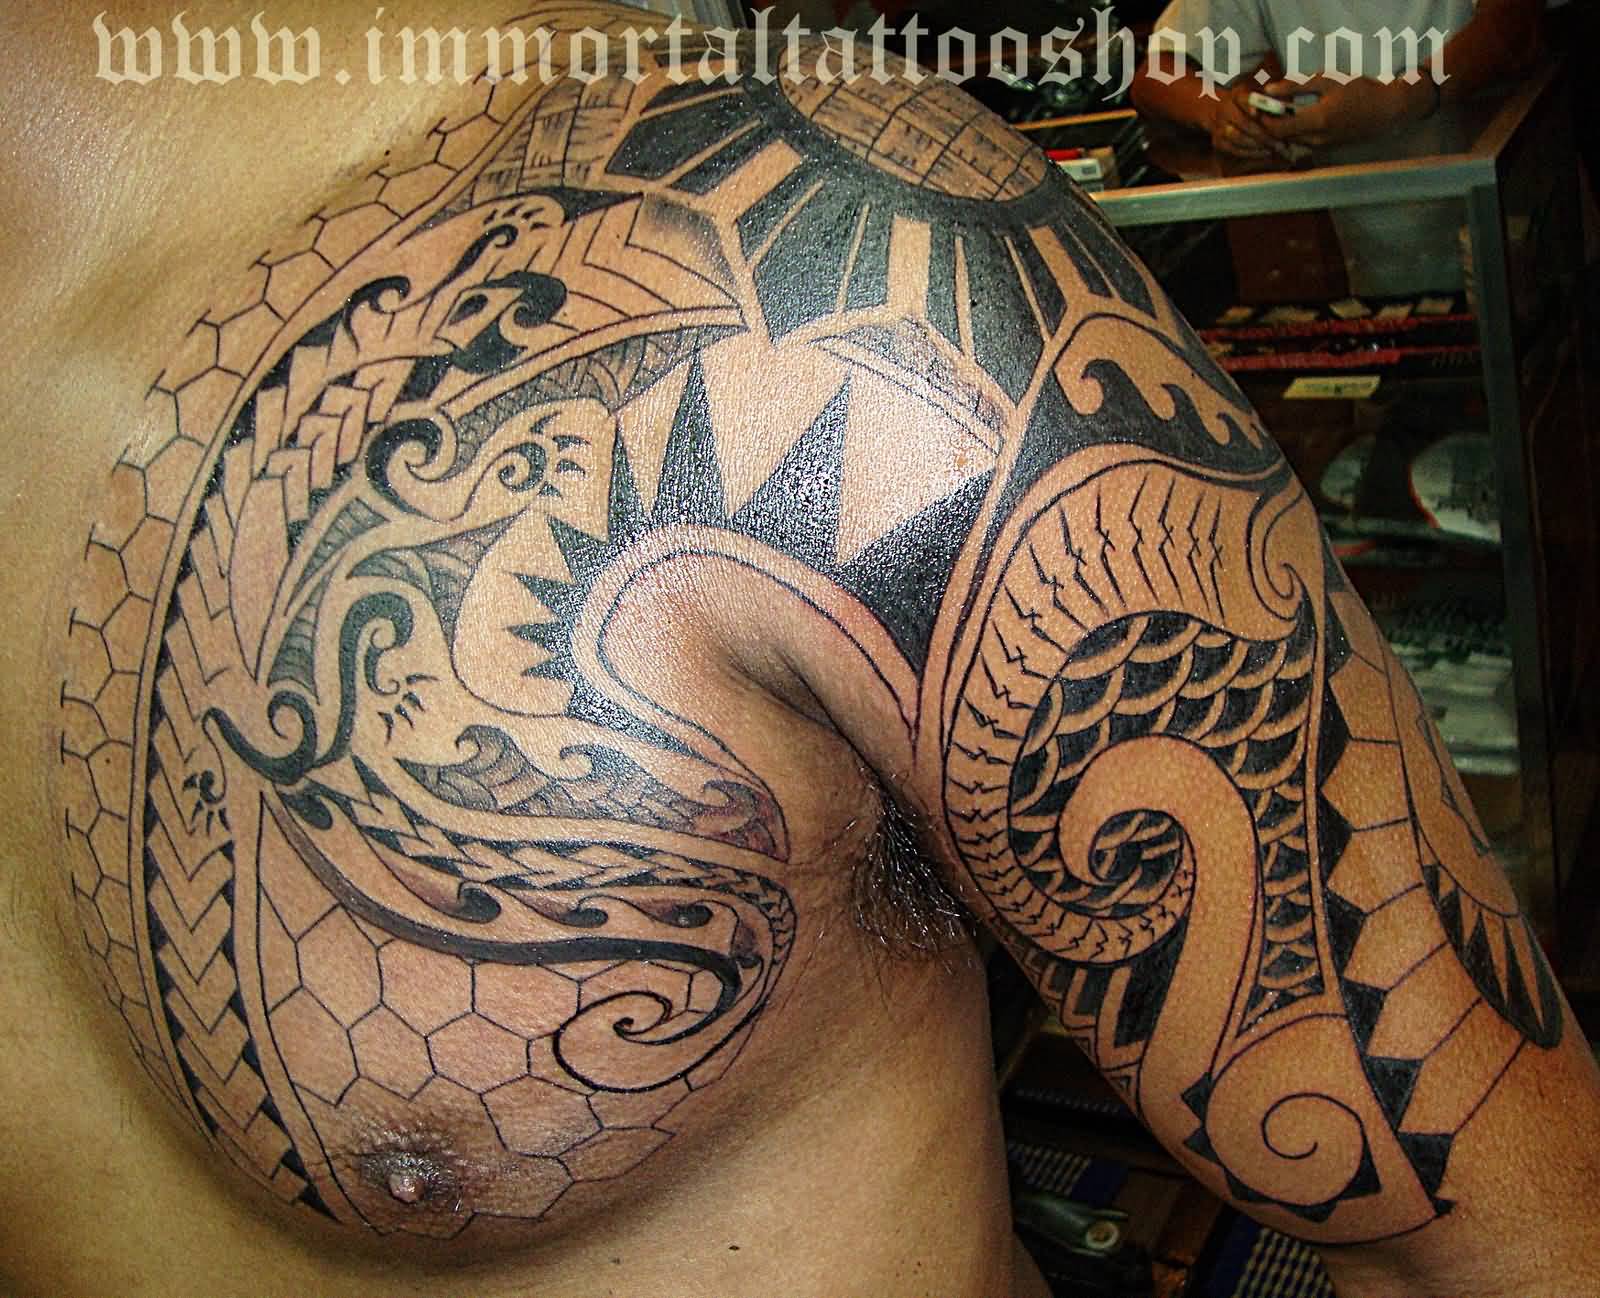 Filipino Tattoo On Chest And Left Shoulder